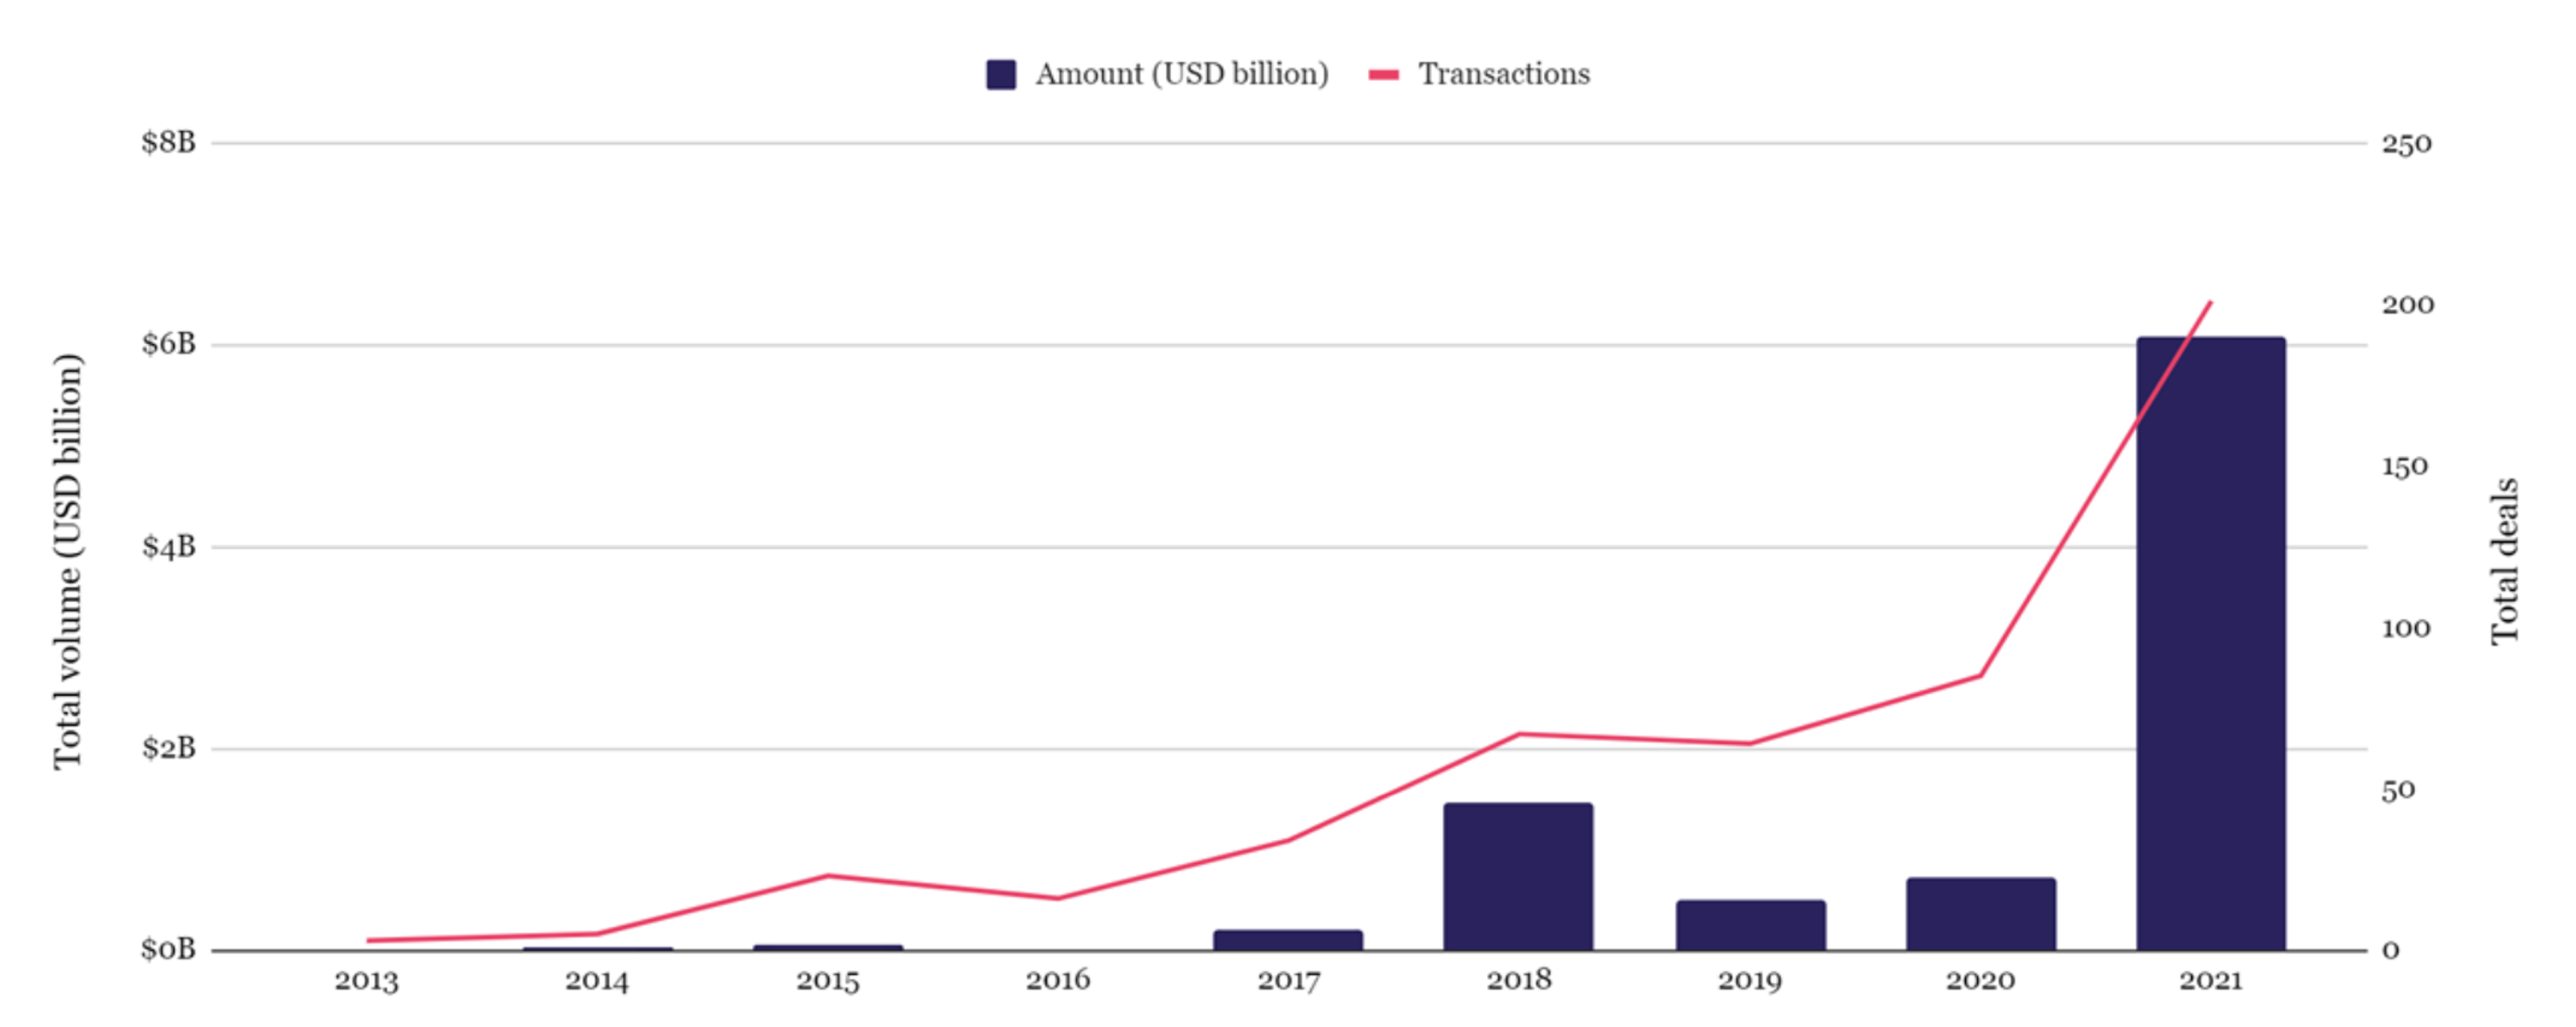 Crypto/Blockchain M&A transactions and Dollar Volume, The Block Research